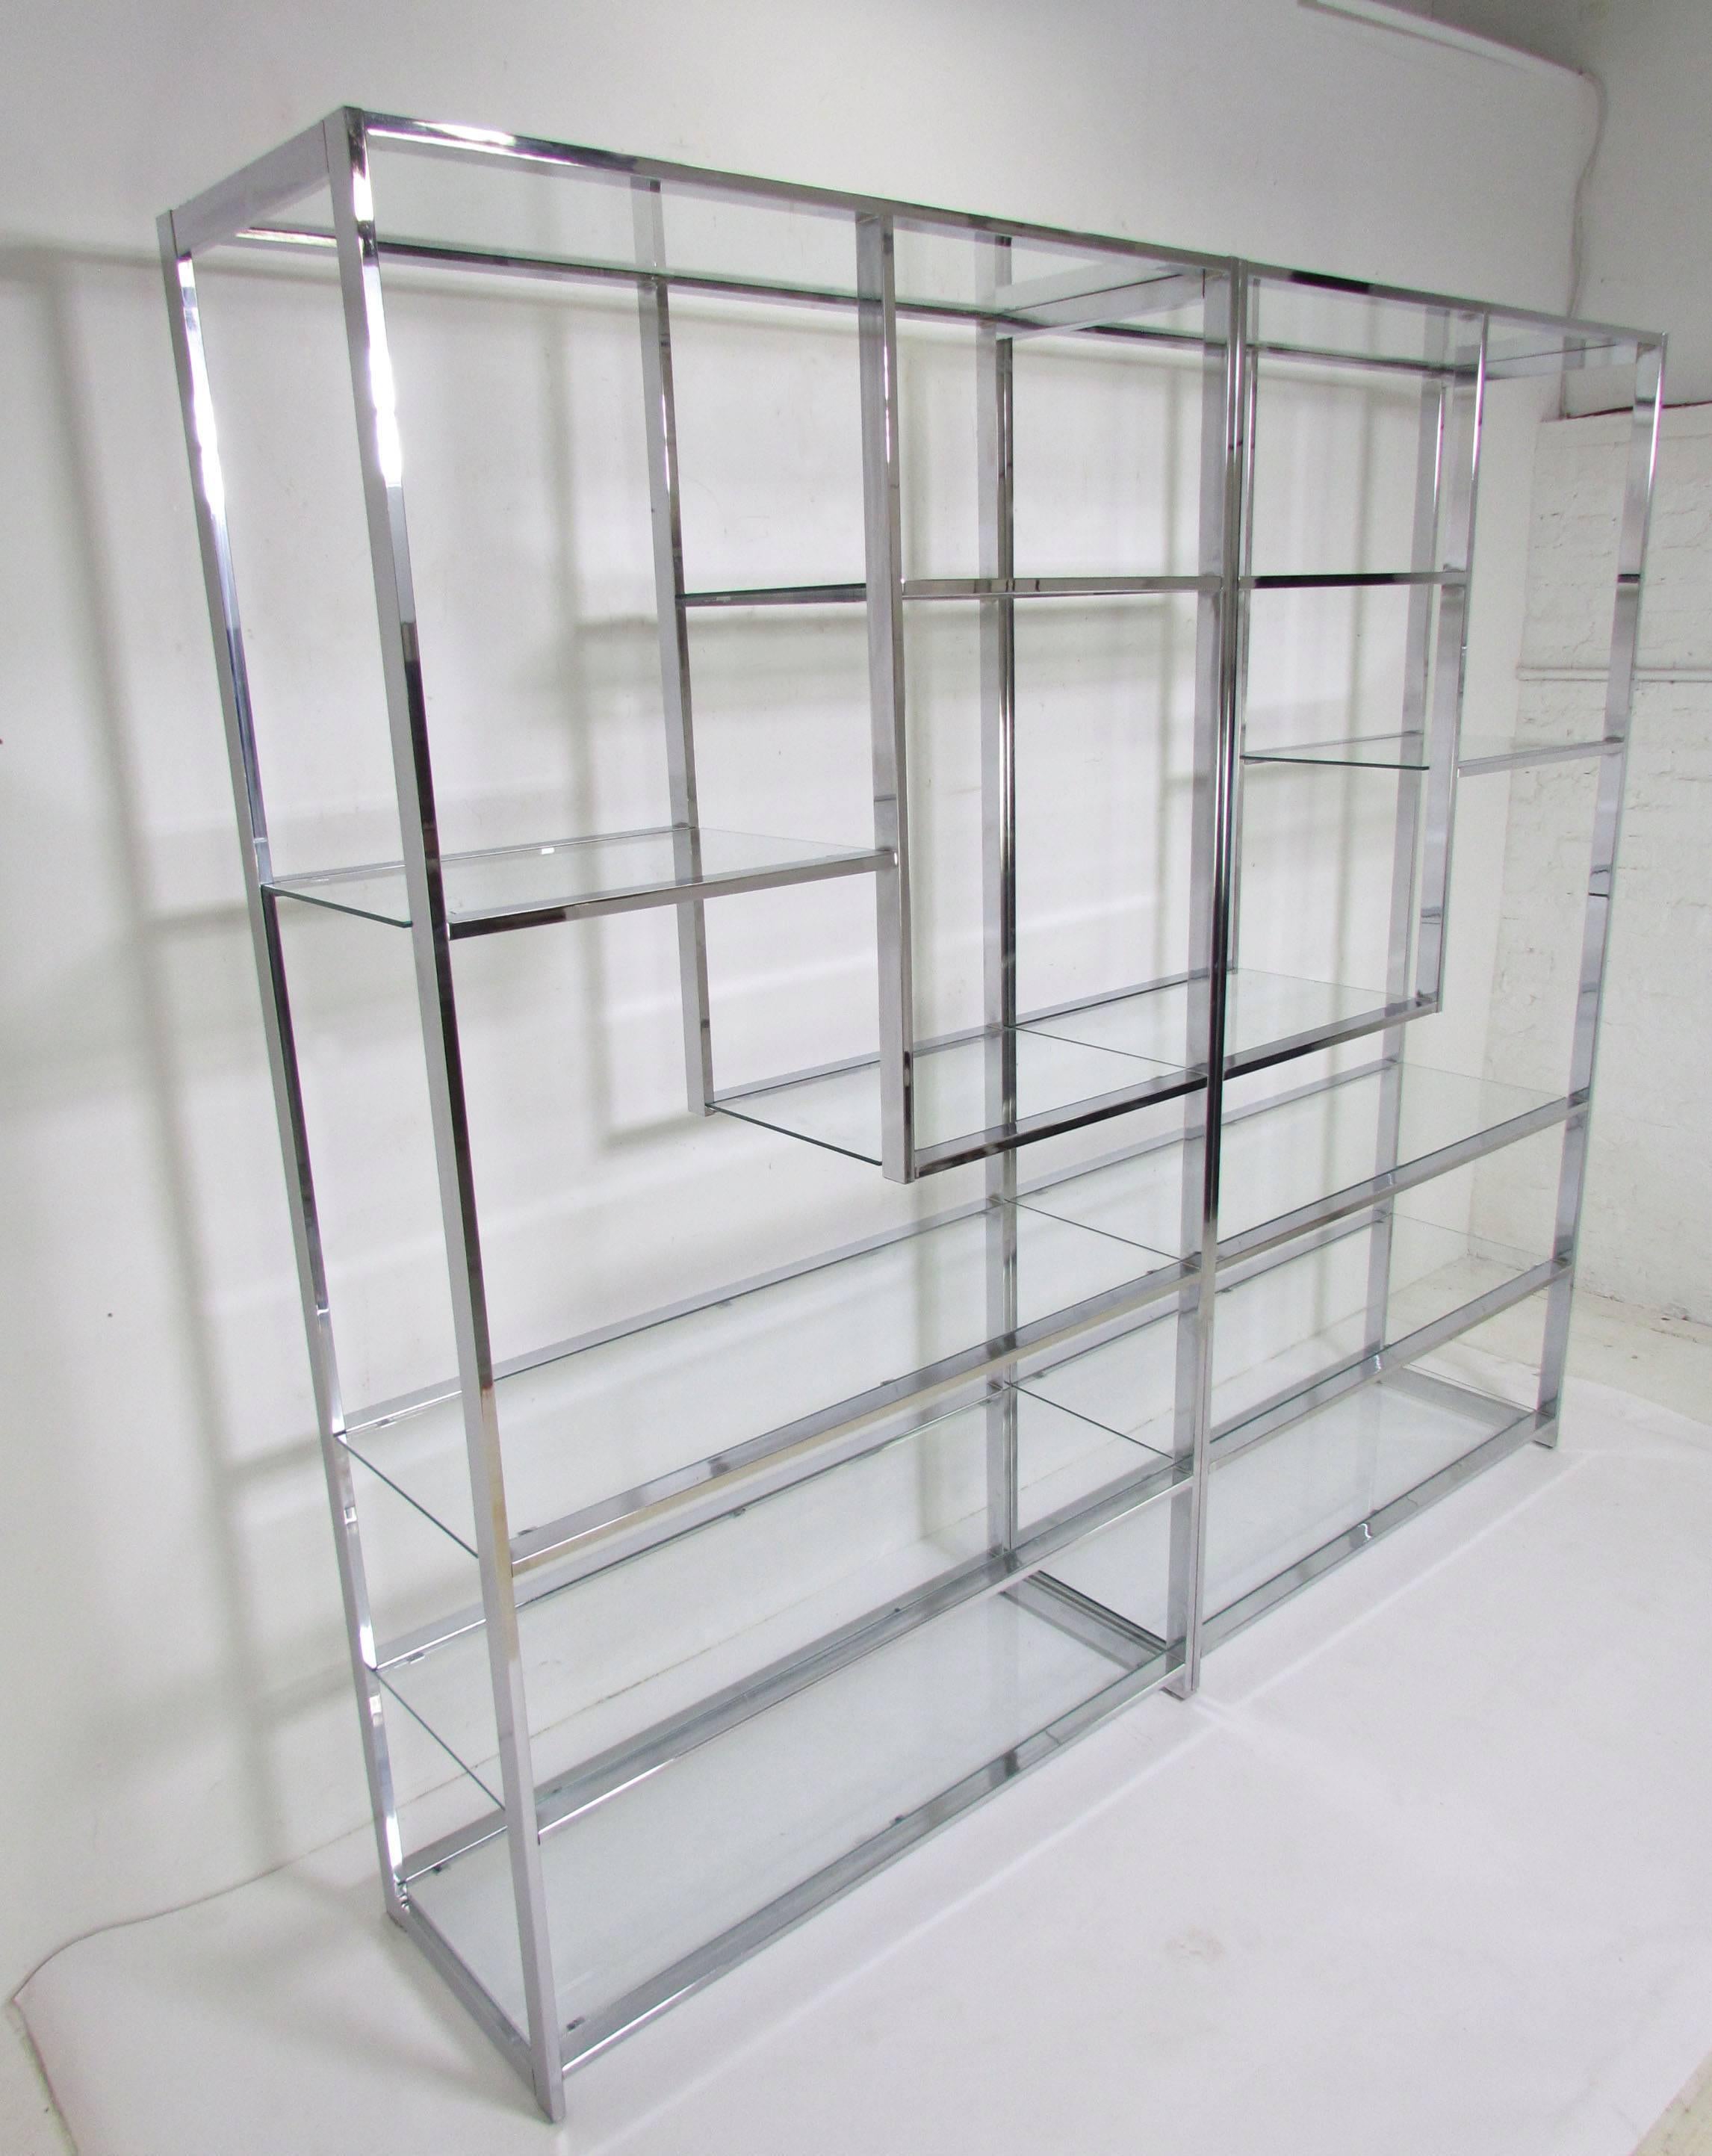 Pair of etageres in chromed steel with glass shelves by Milo Baughman for Design Institute America (DIA), circa 1970s. Can be used together as shown, or separately if preferred. 

Each one measures 42